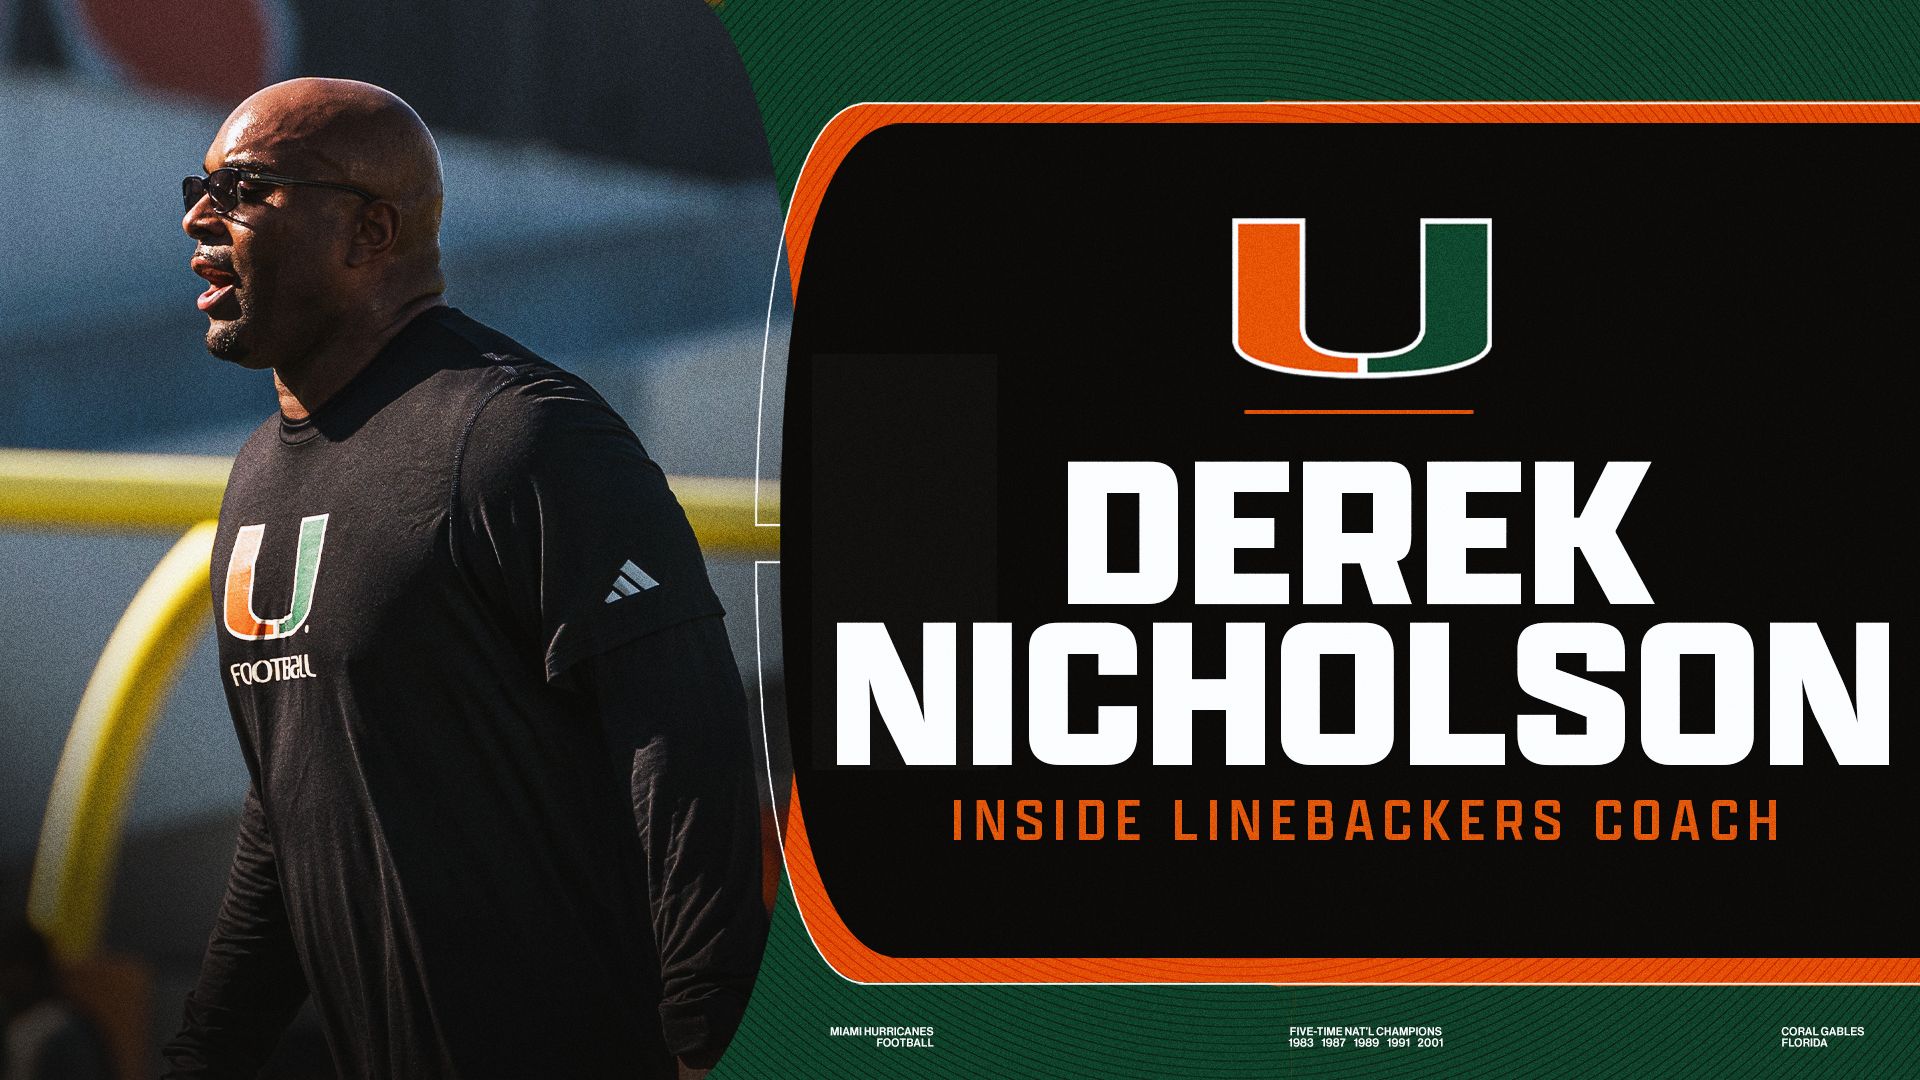 Nicholson Signs On As Inside Linebackers Coach